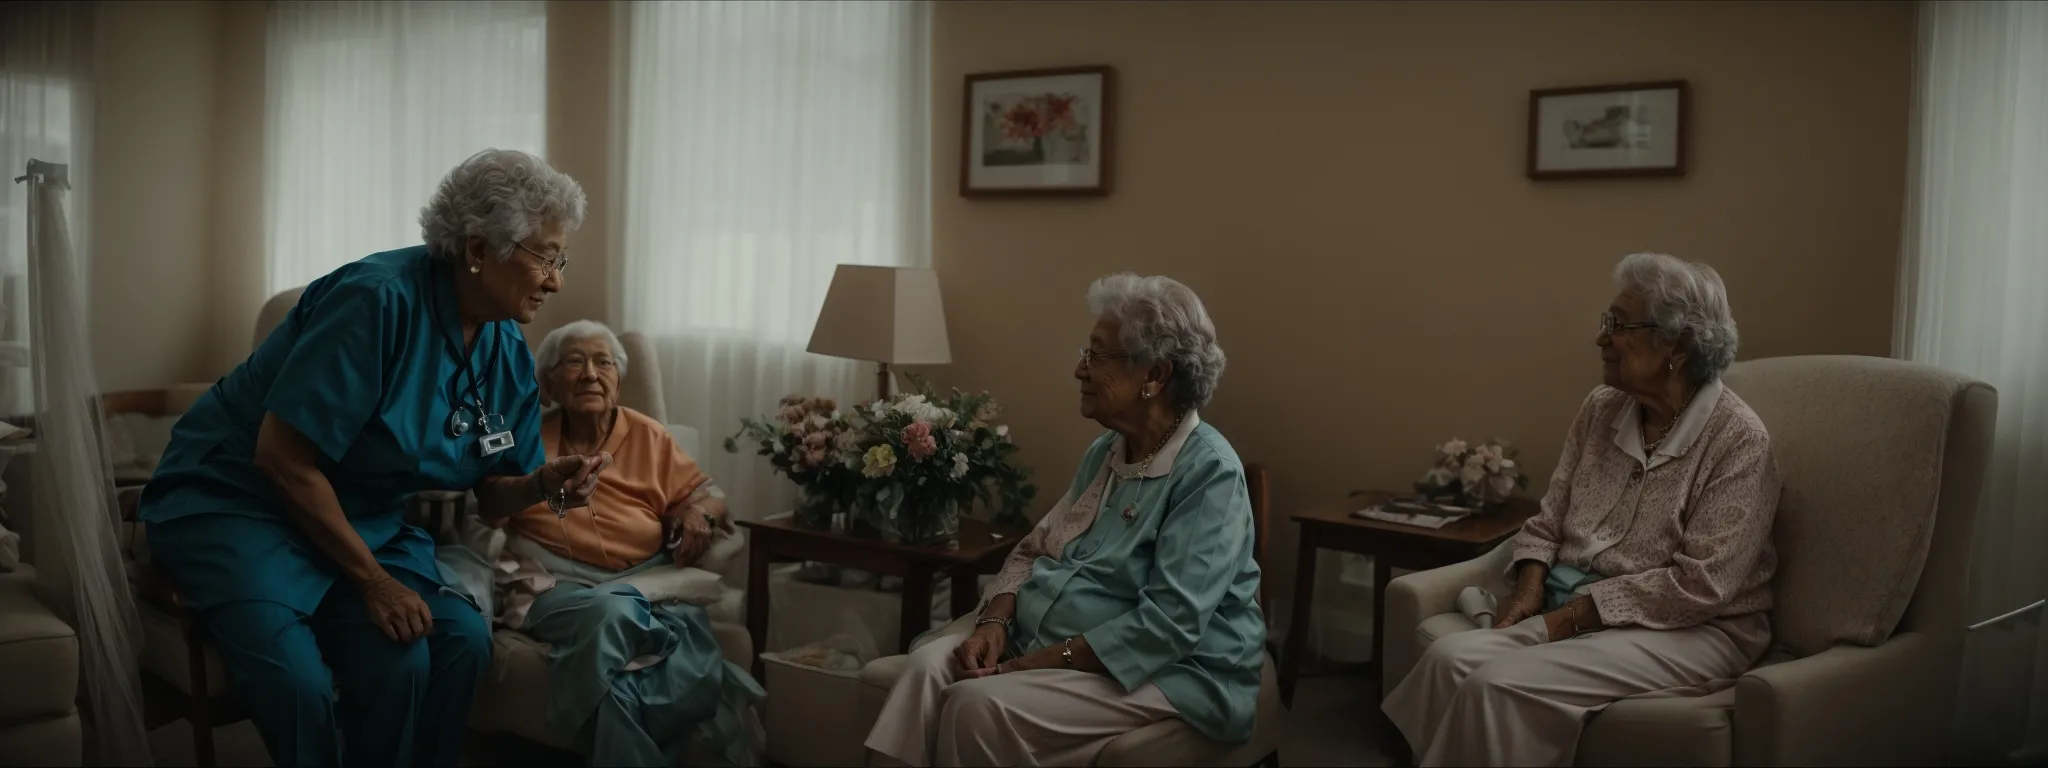 a compassionate nurse interacts with elderly residents in a warm, inviting common area of a nurturing home. 